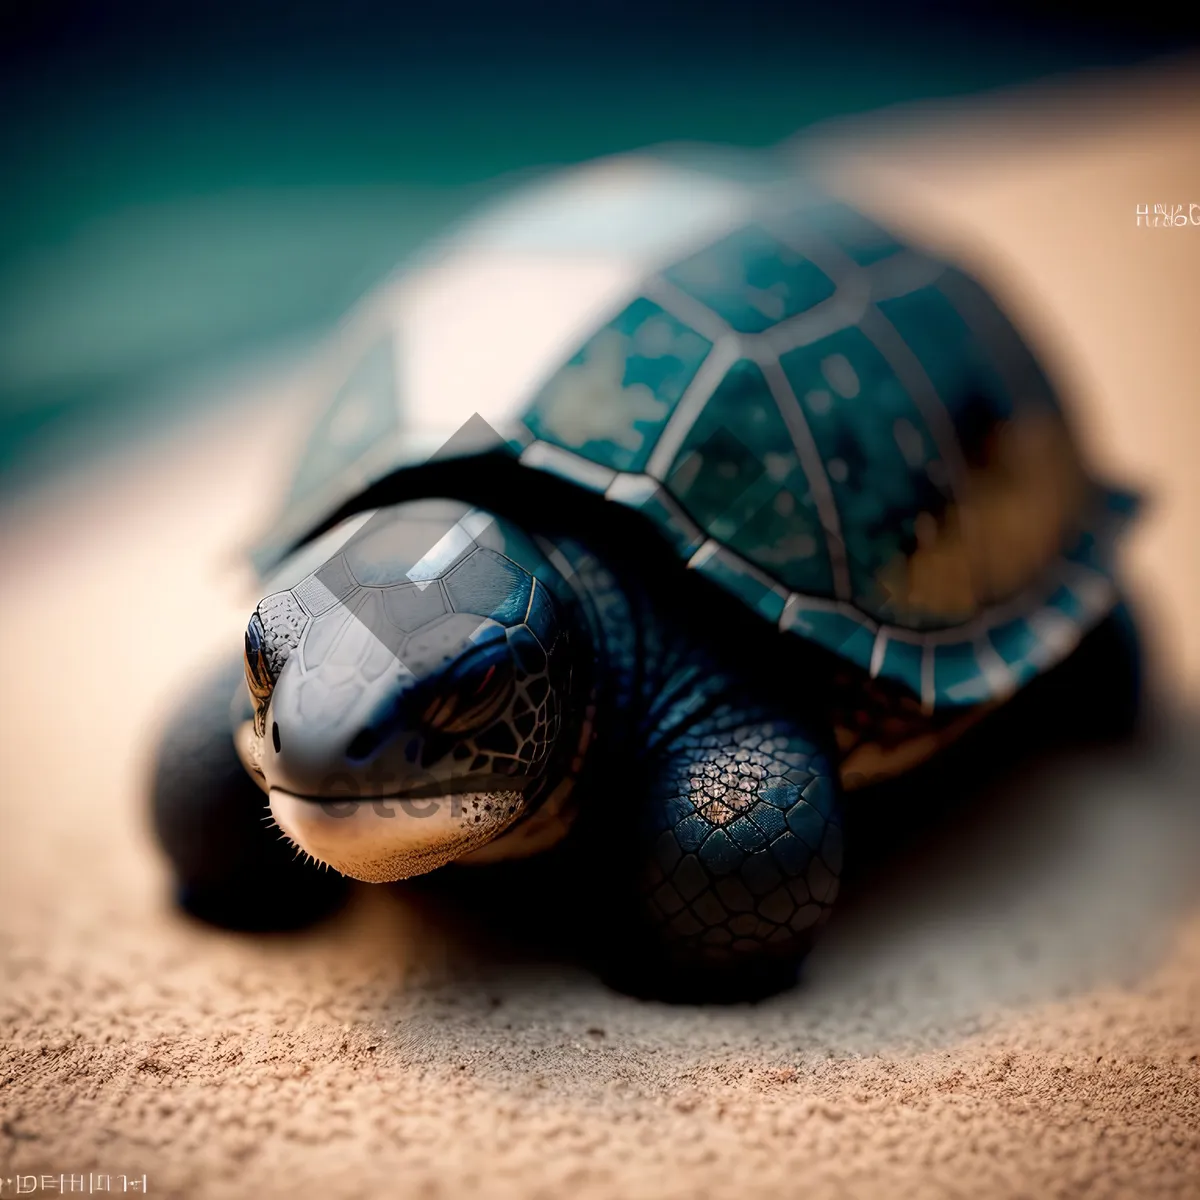 Picture of Peaceful Turtle Serenely Resting on Sandy Beach